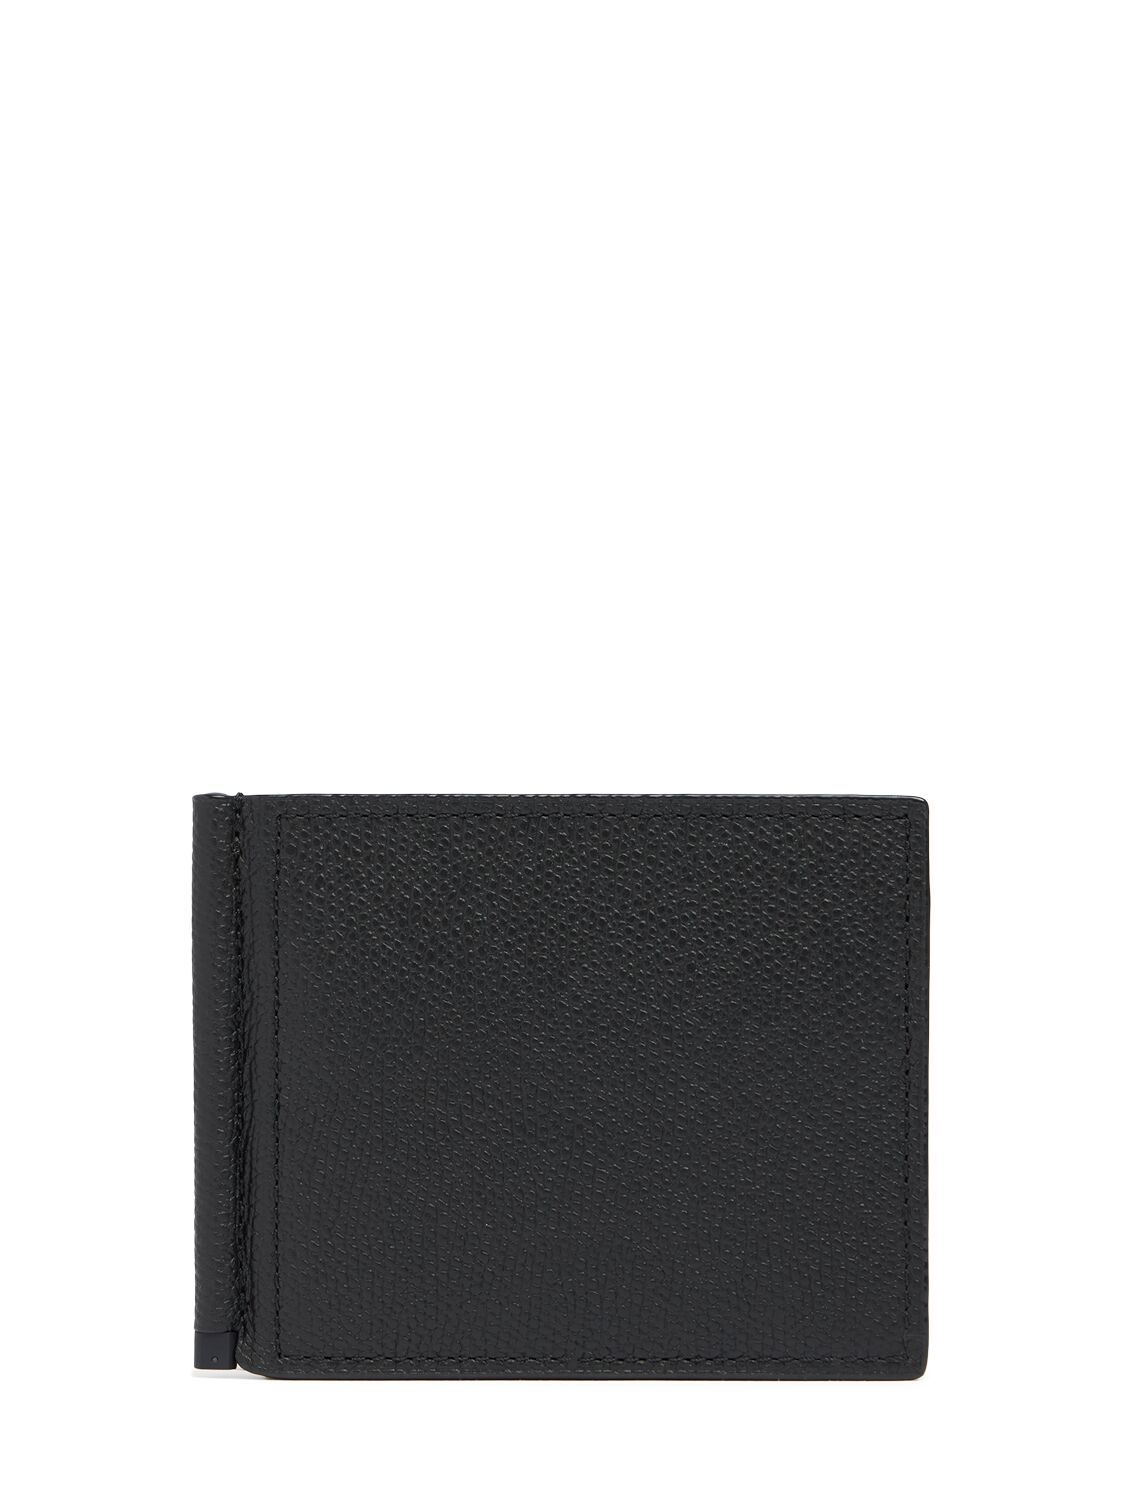 Valextra Leather Money Clip Wallet In Black